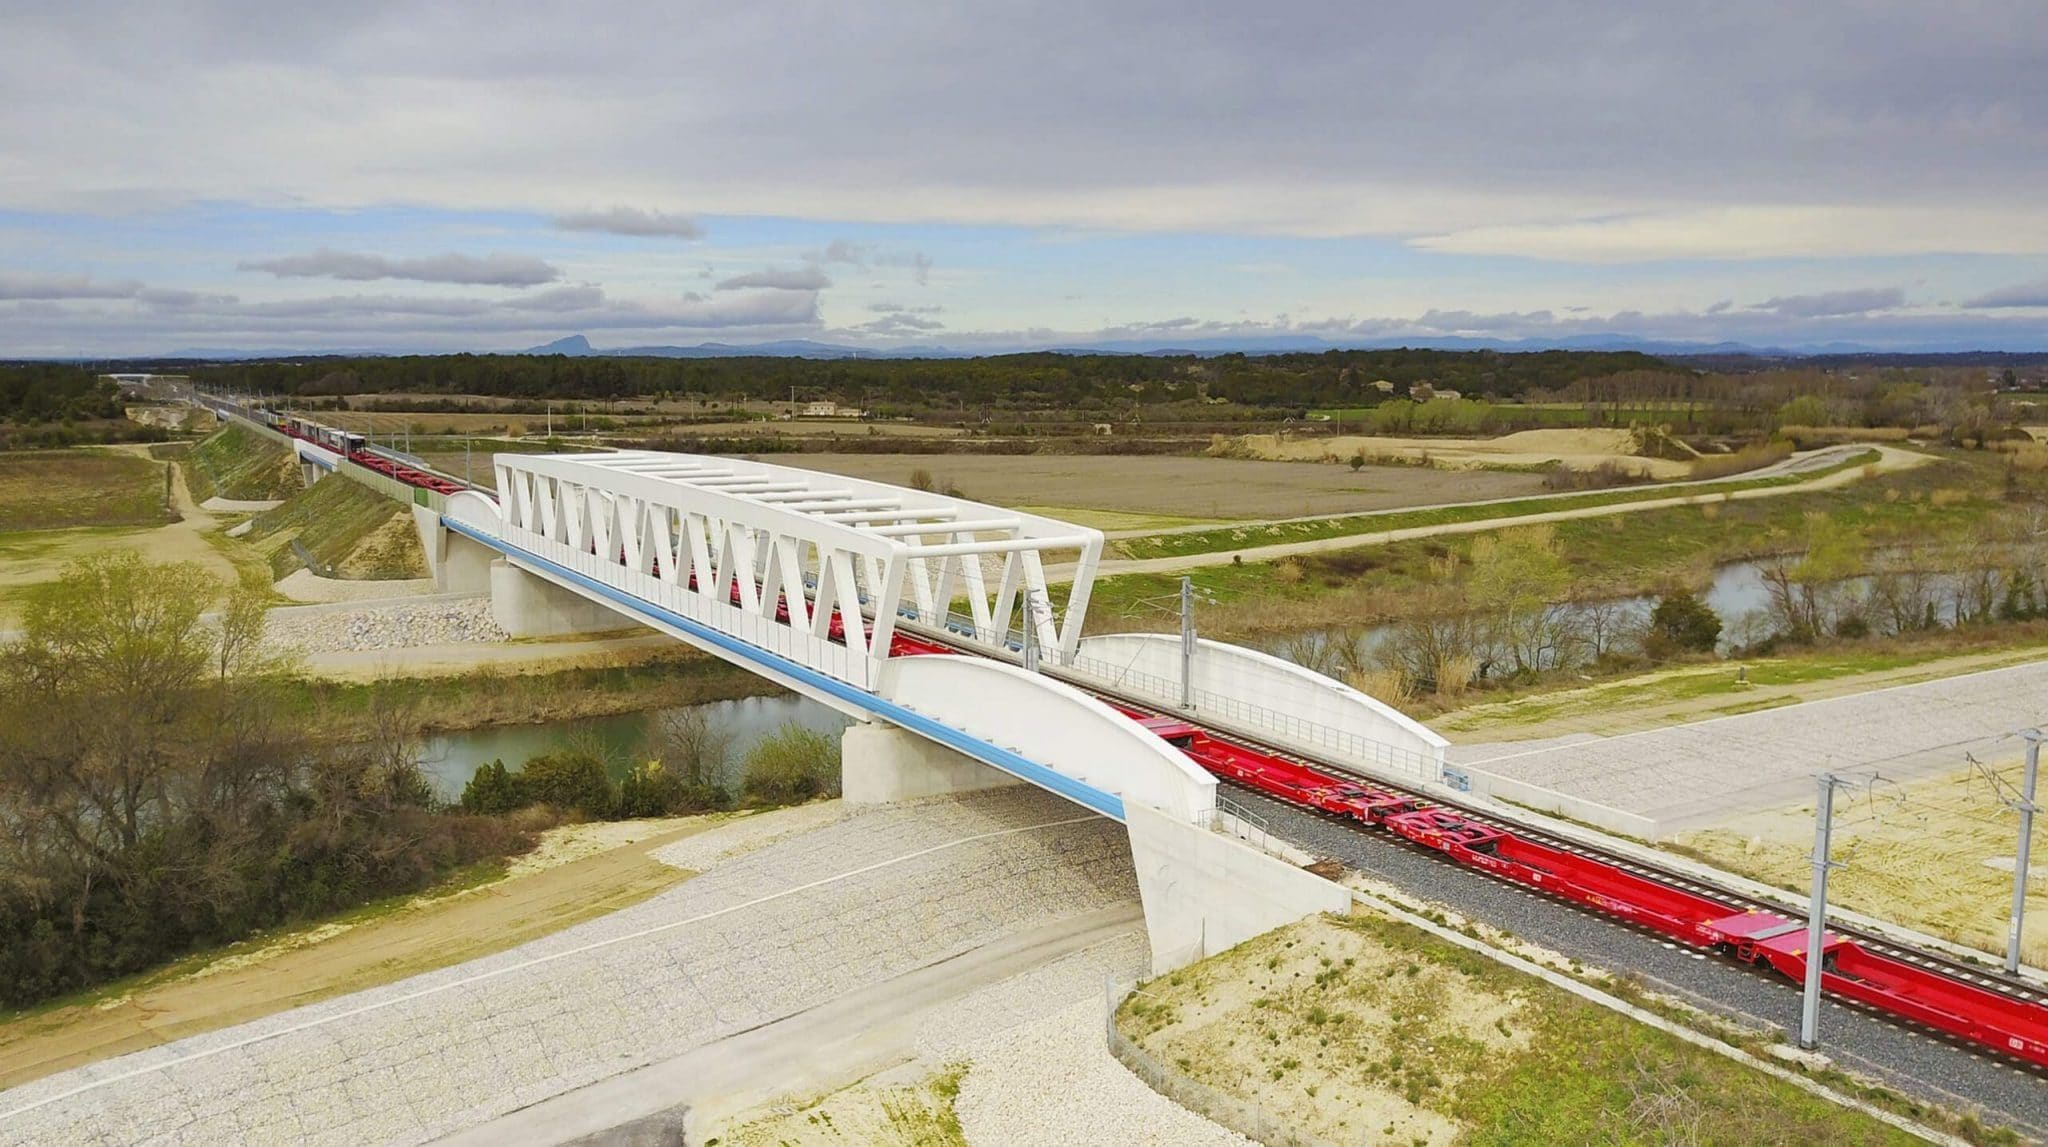 View of a bridge on the Nimes-Montpellier Railway Bypass in use